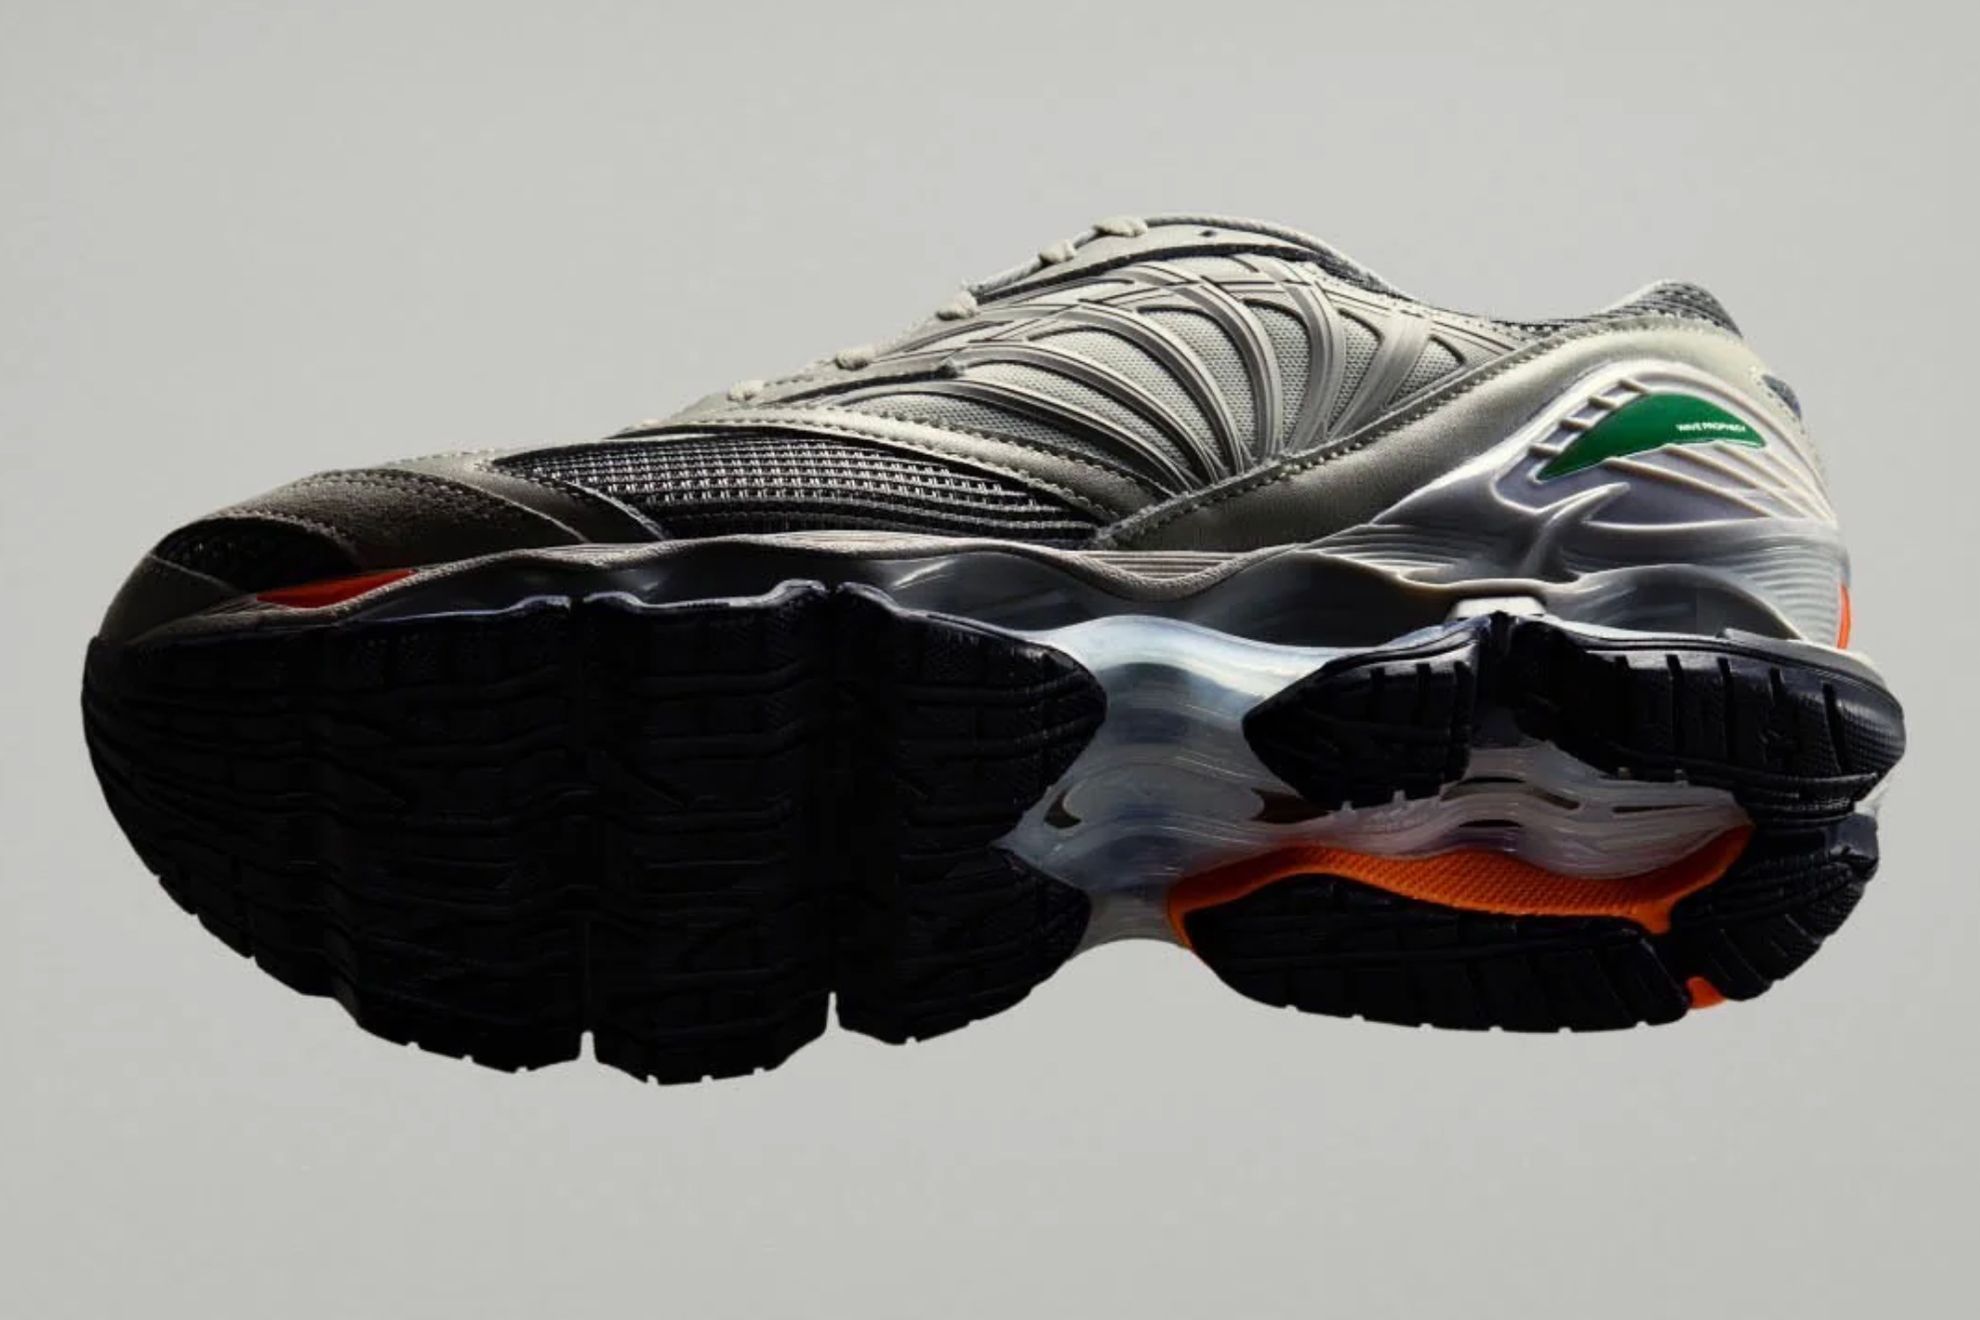 Graphpaper and Mizuno Celebrate With Another Wave Prophecy 8